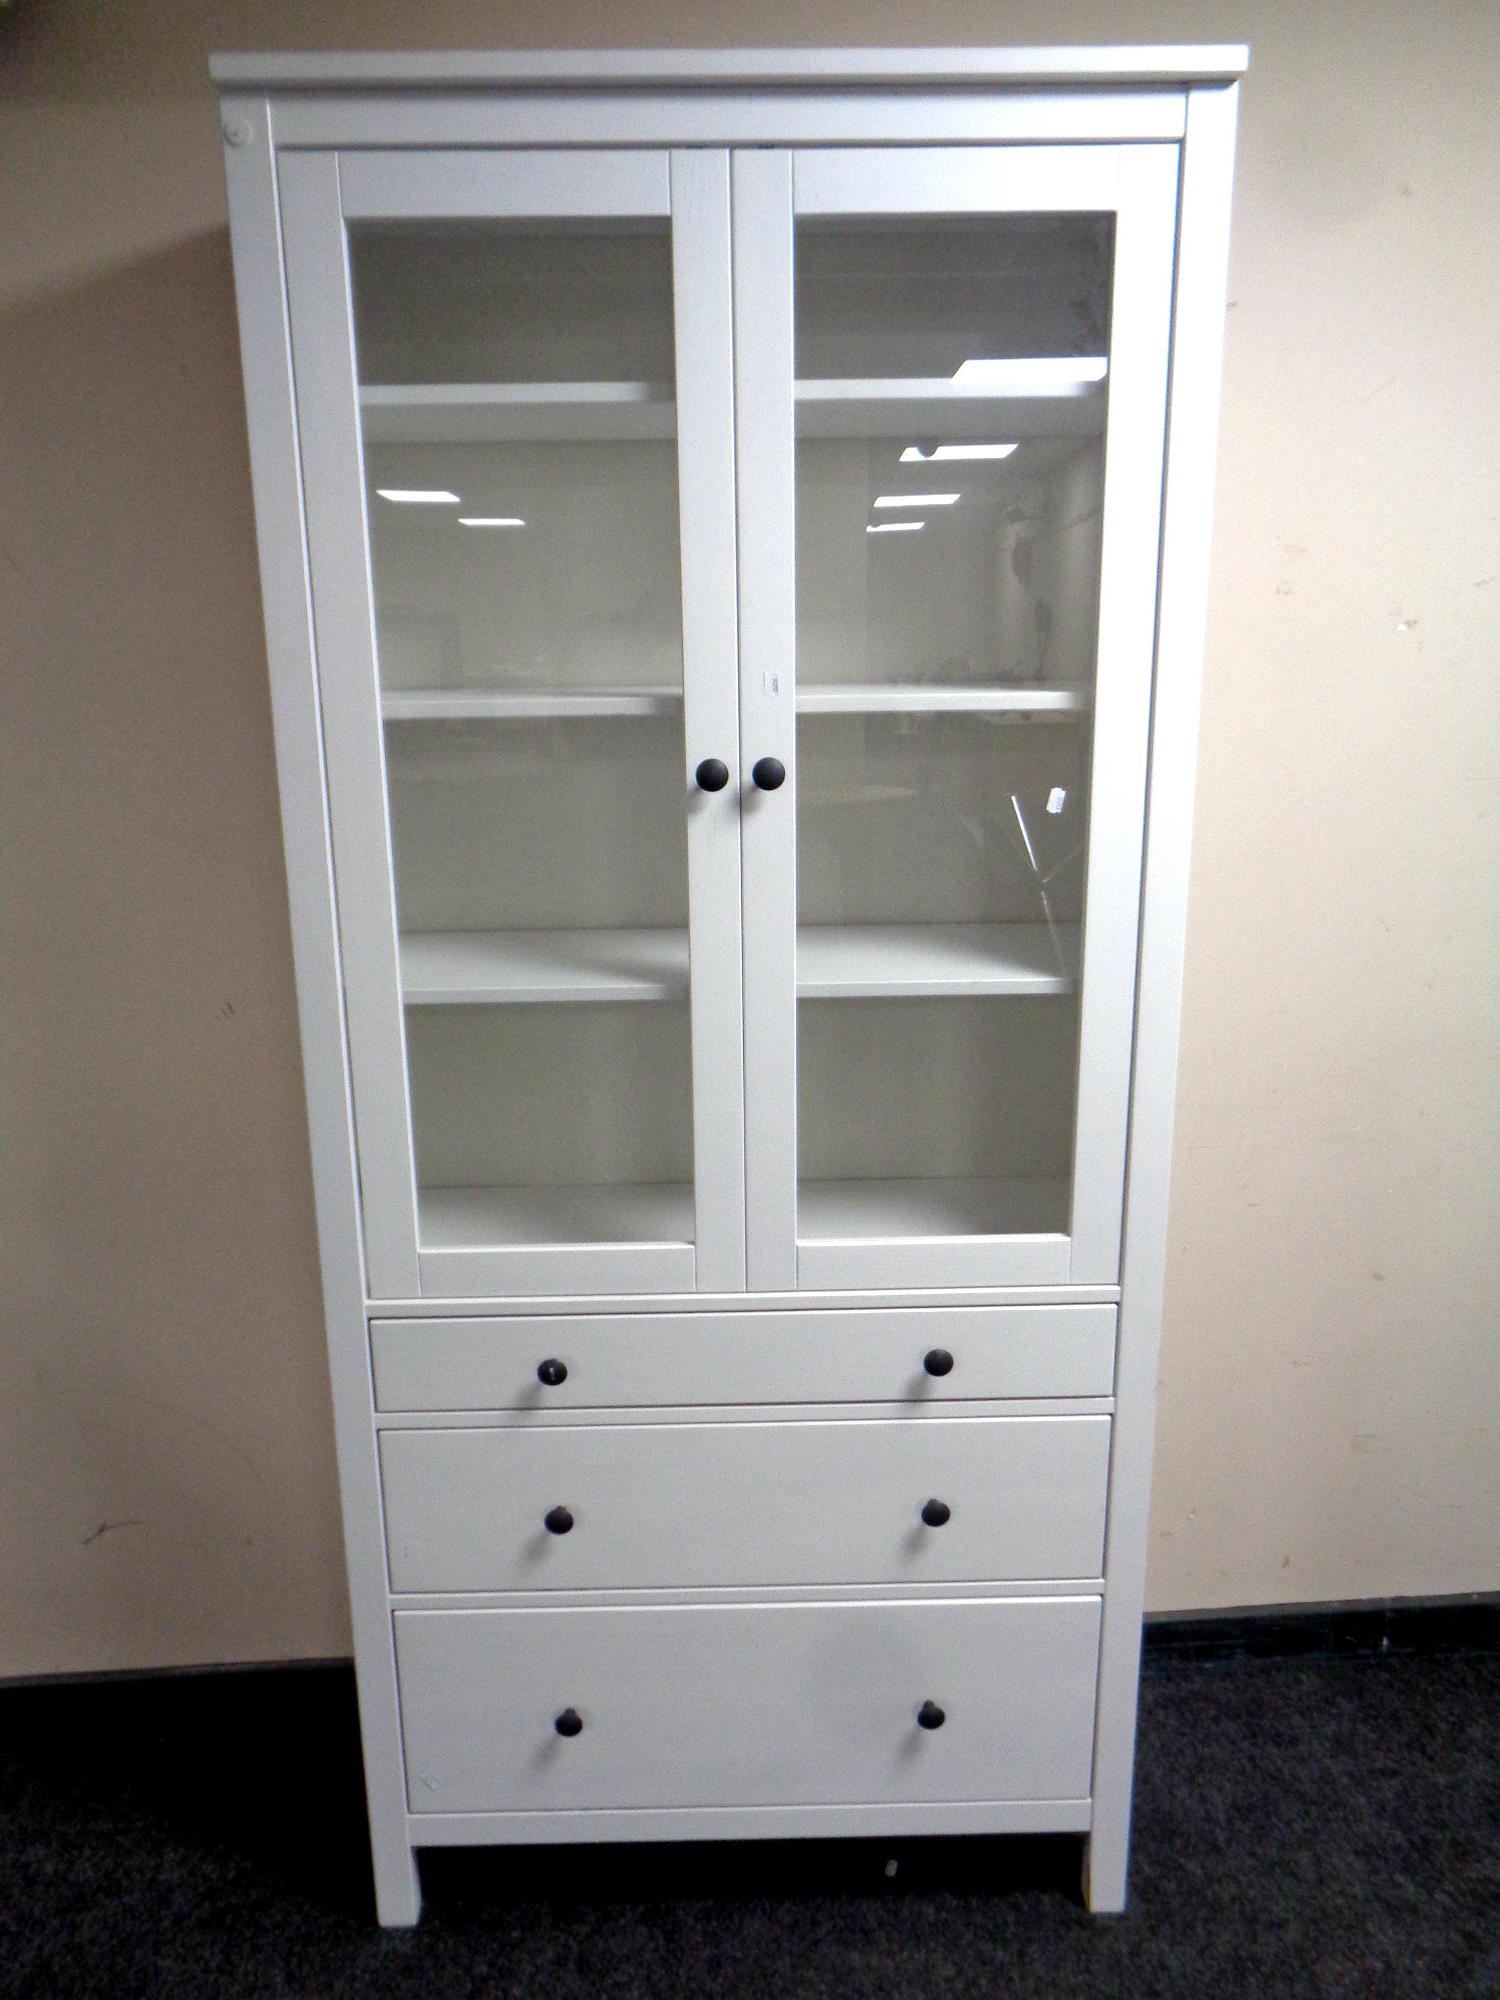 An Ikea painted pine double door bookcase fitted three drawers beneath